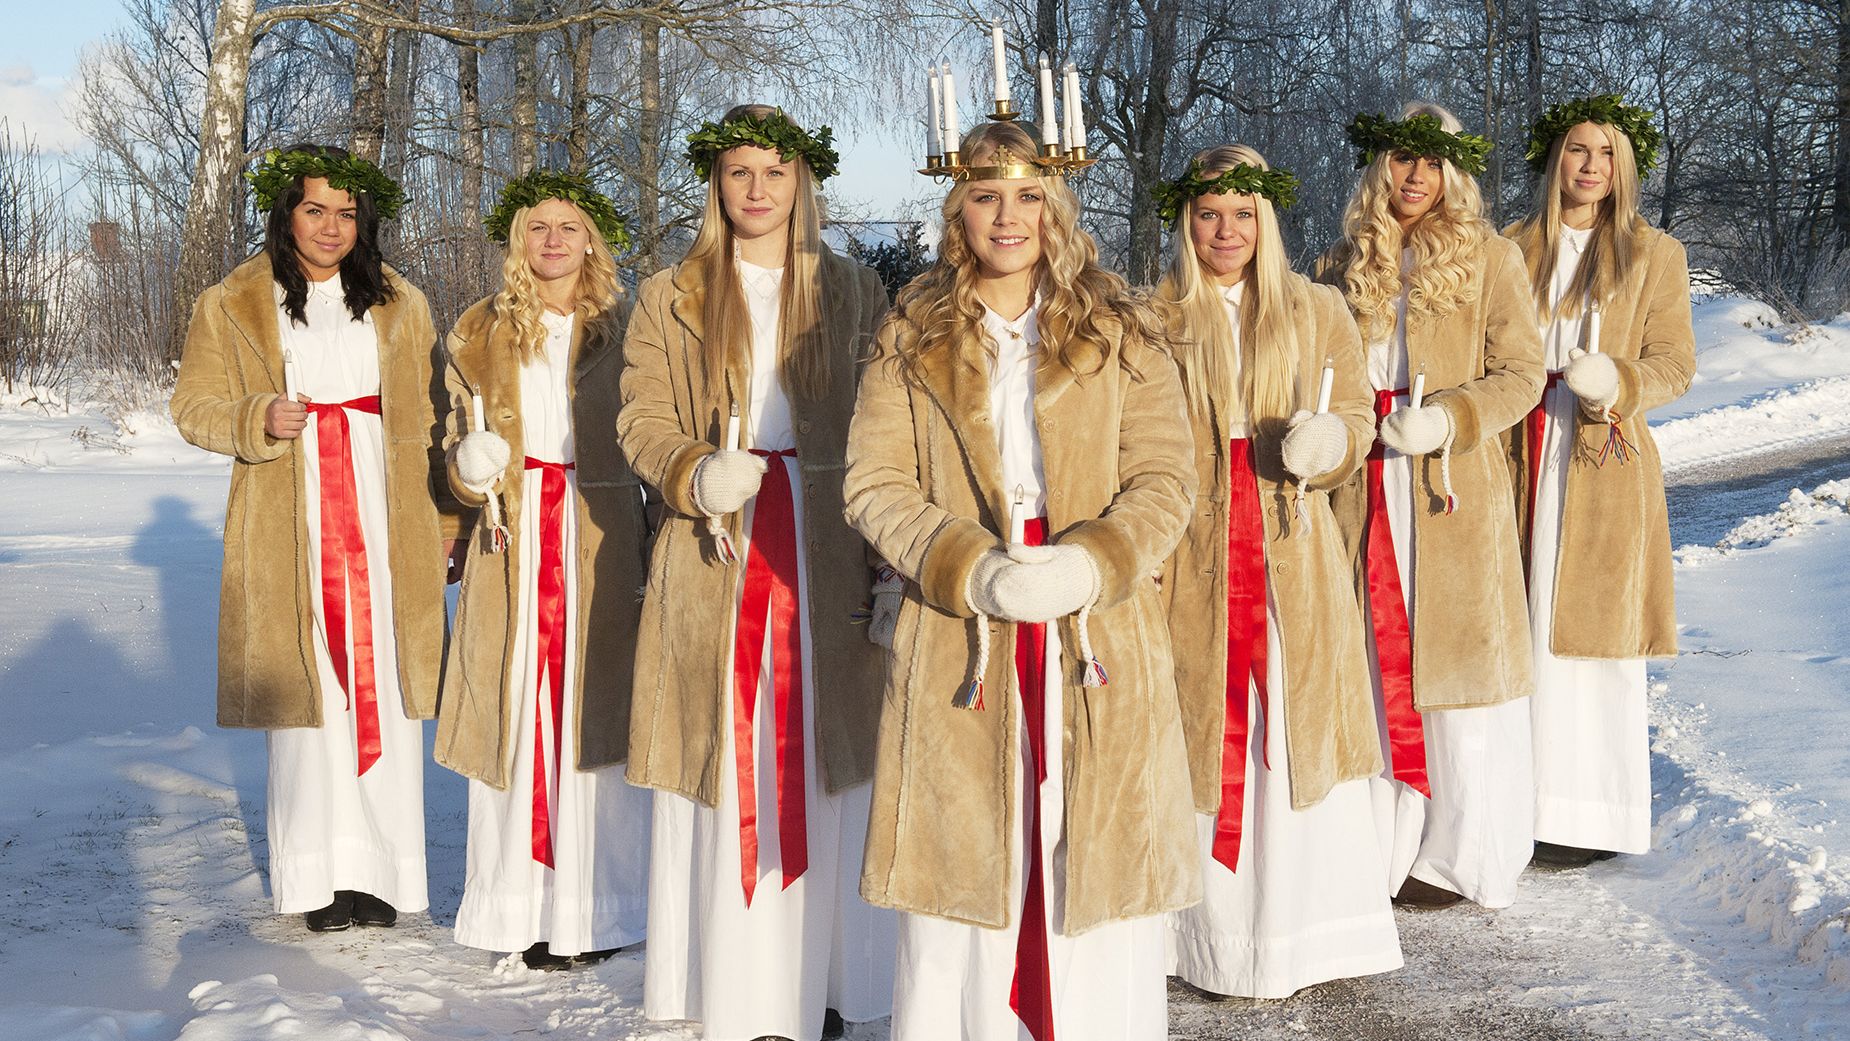 Lucia Day celebrations in Sweden involve a crown of light that represents the coming of light amid winter's darkness.